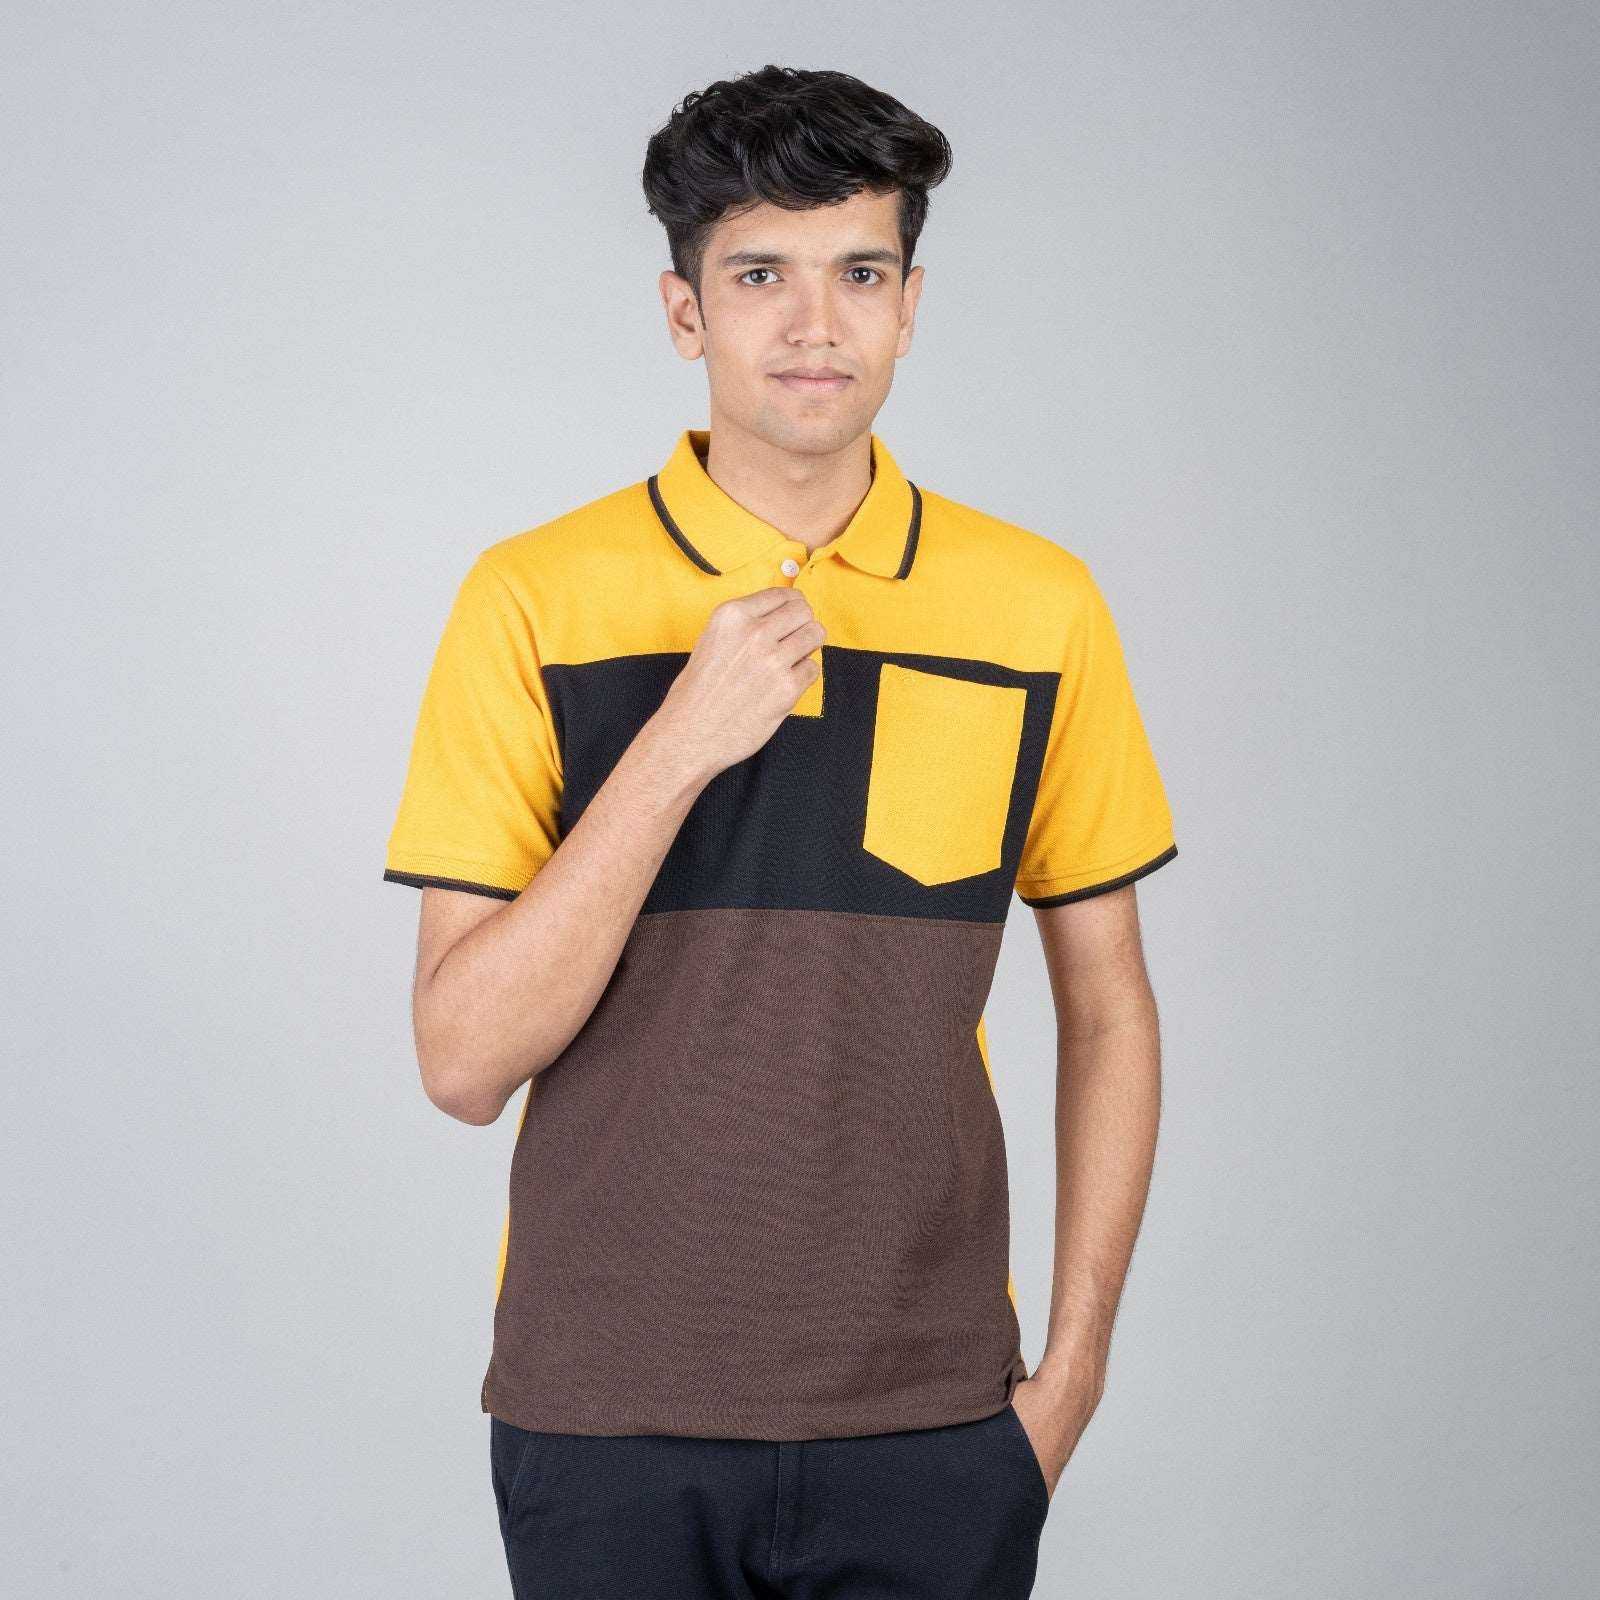 Polo T-Shirt with Pocket - Yellow, Black, Brown